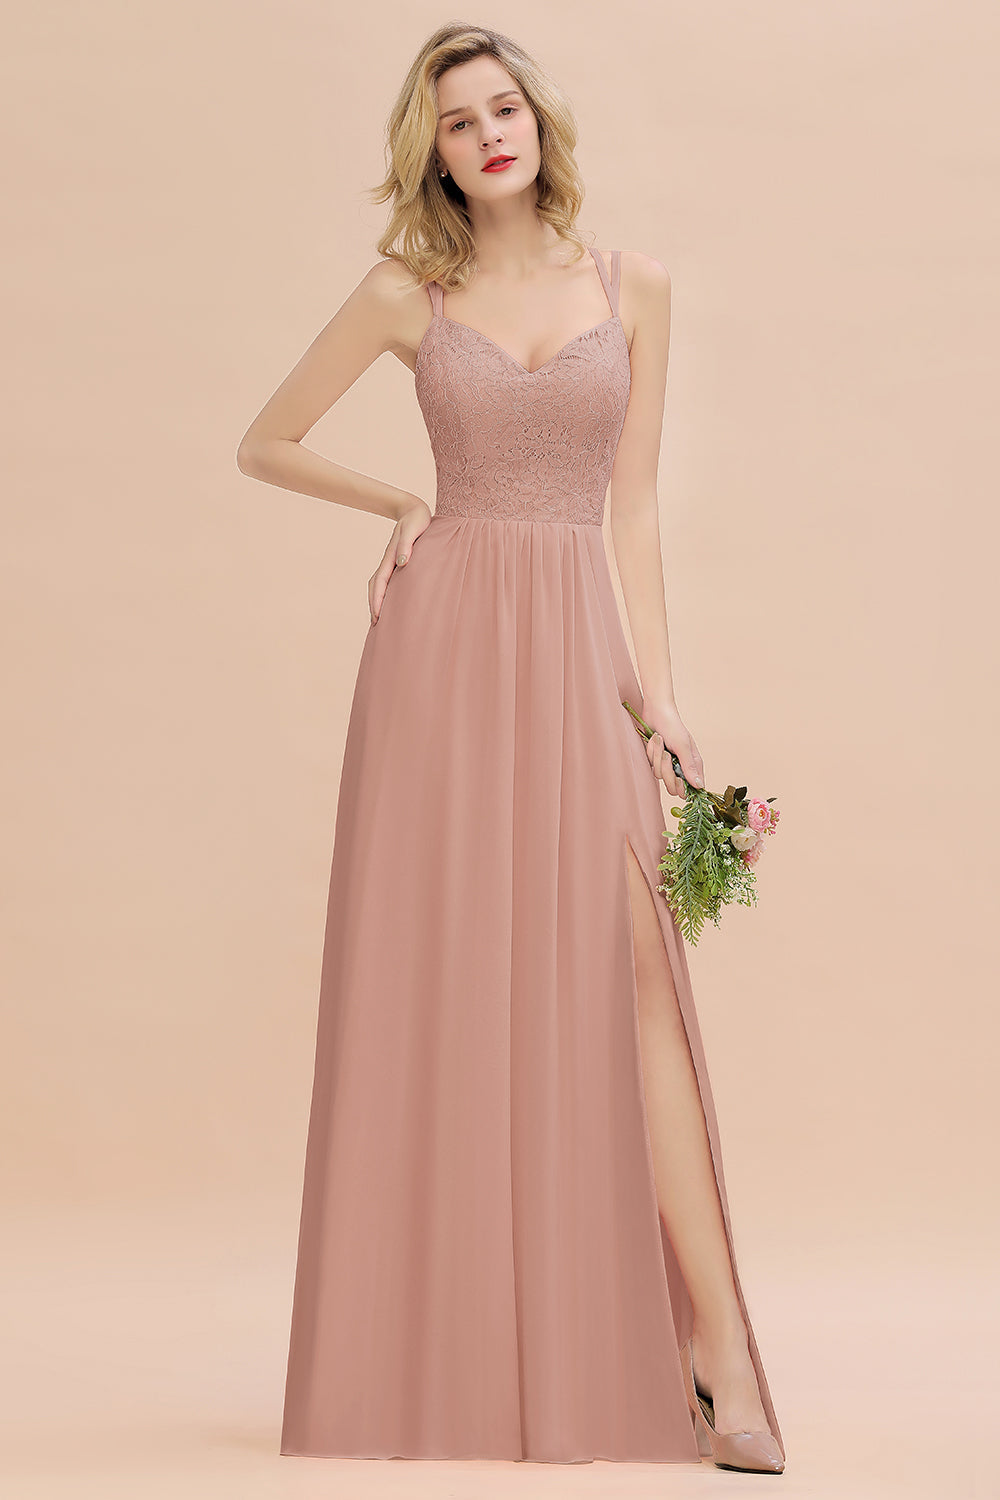 Sexy Spaghetti-Straps Coral Lace Bridesmaid Dresses with Slit